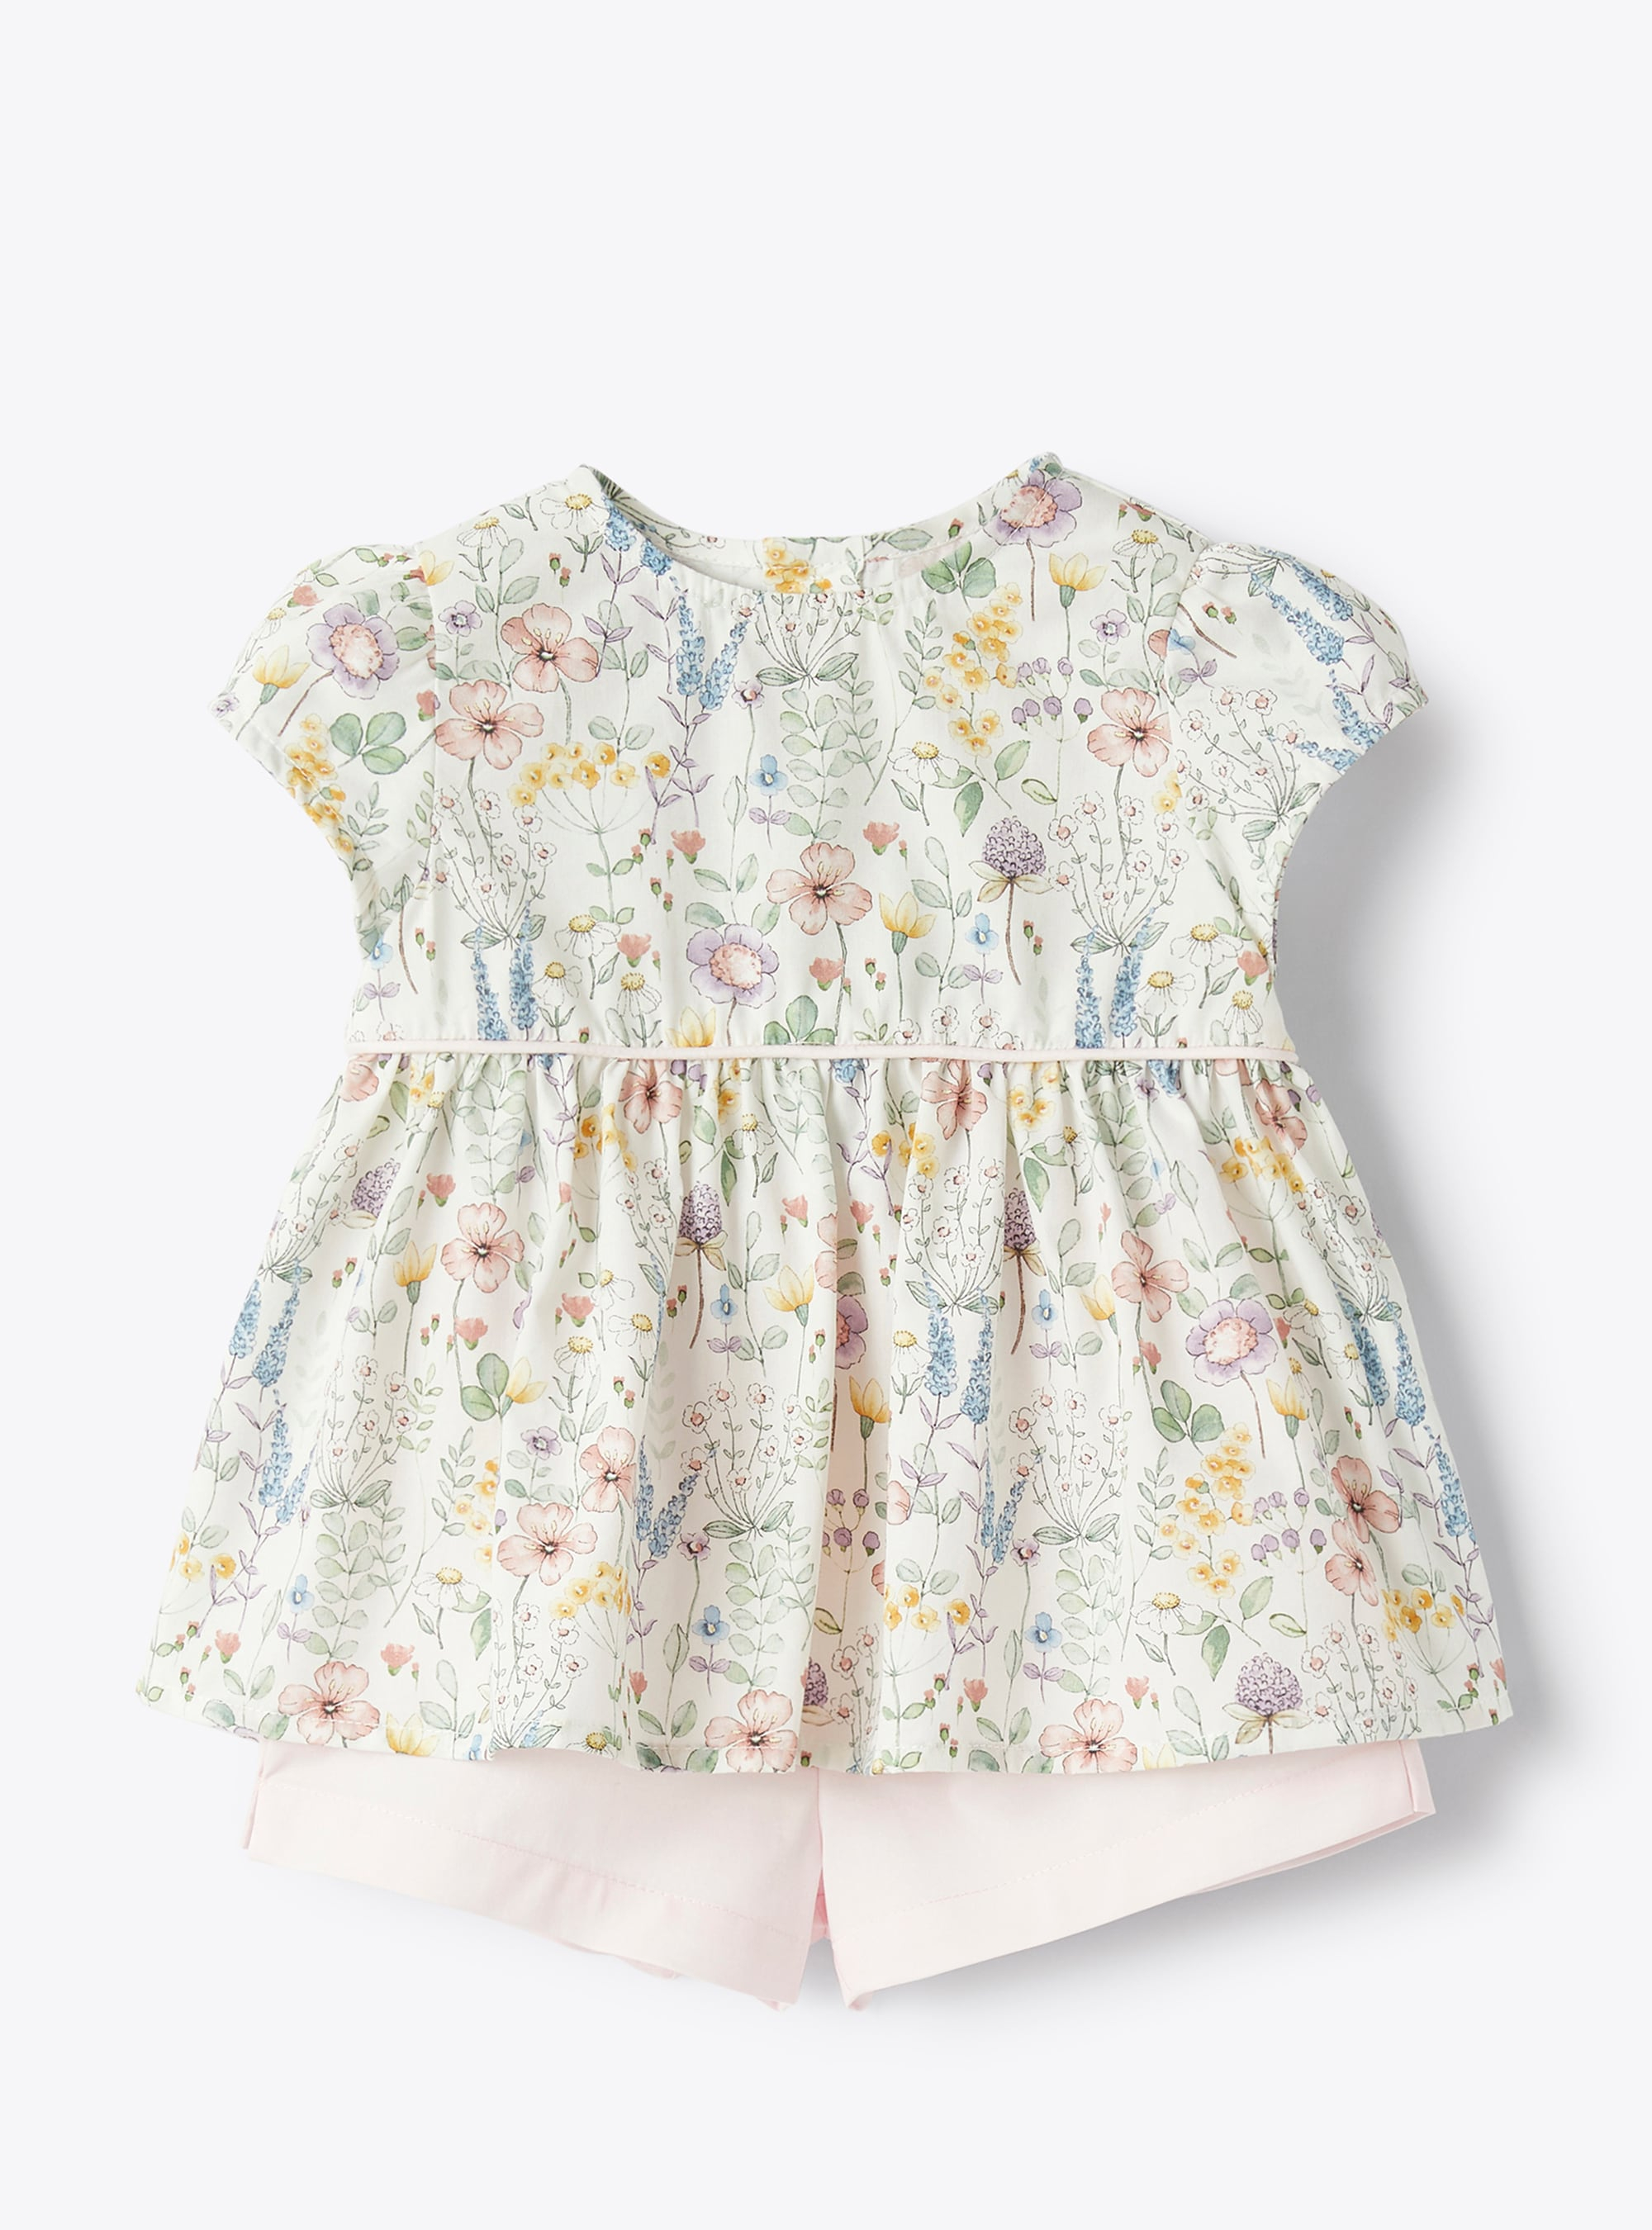 Two-piece set for baby girls in floral-printed organic cotton - COMPLETO DUE PEZZI - Il Gufo